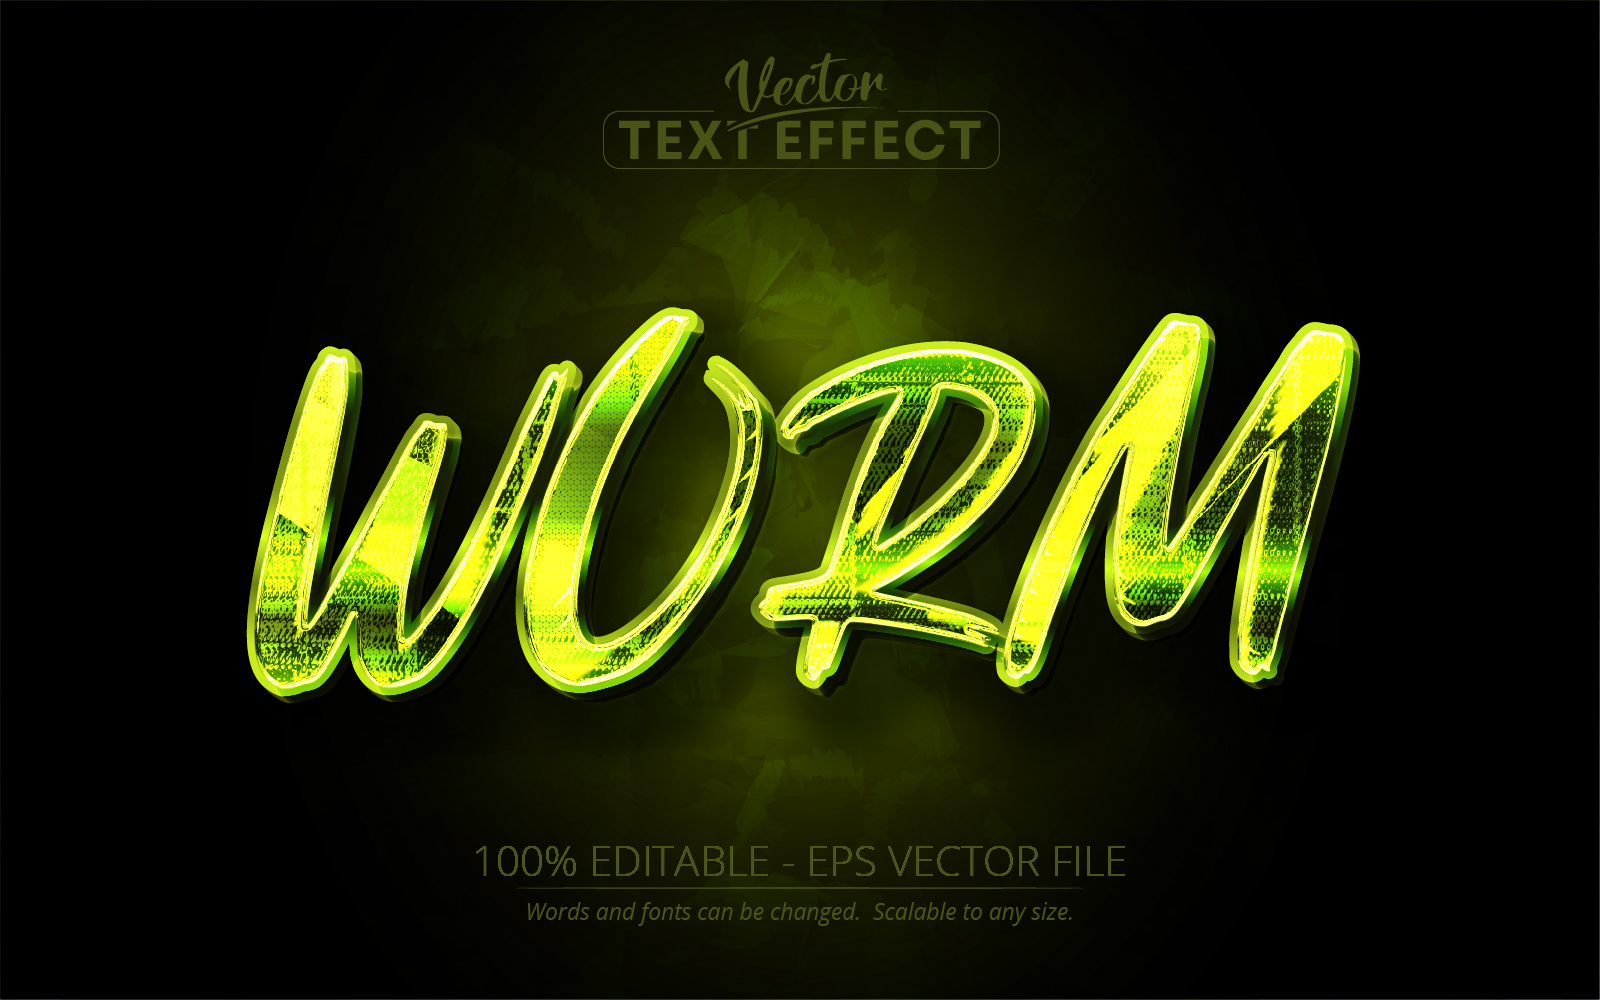 Worm - Editable Text Effect, Font Style, Graphics Illustration